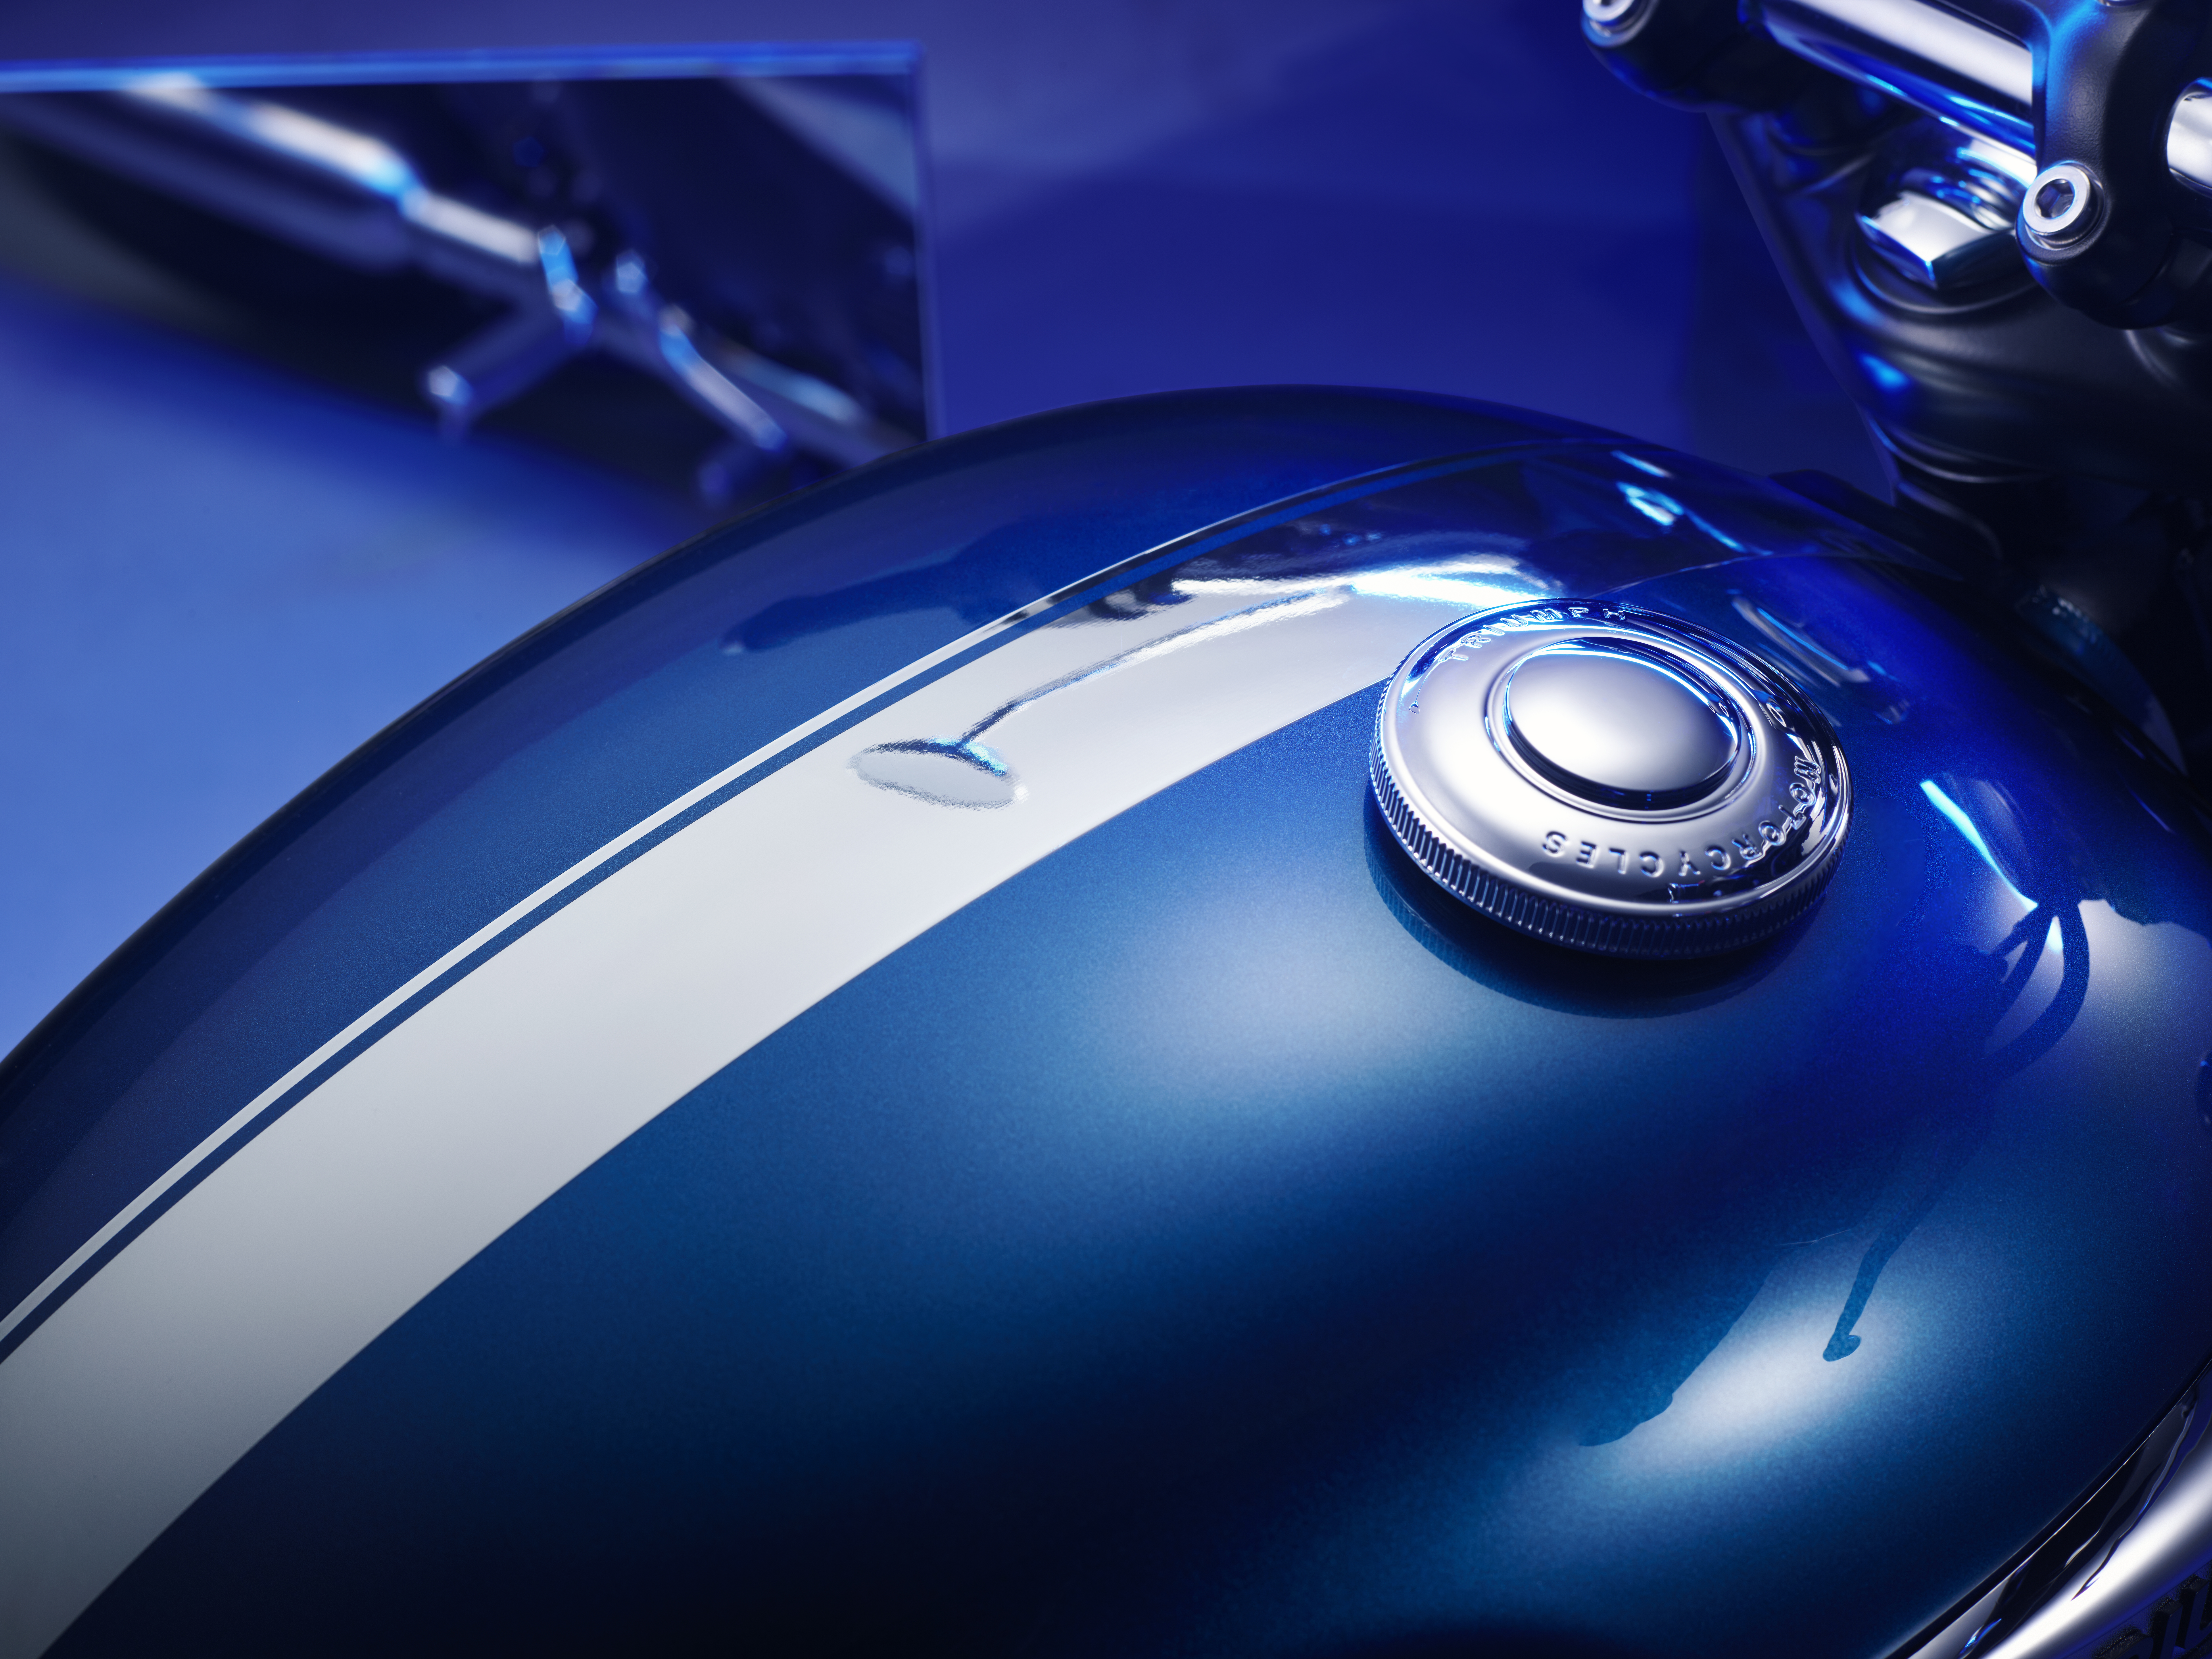 Close-up HD wallpaper of the chrome fuel tank on a Triumph Bonneville T100 in blue with elegant white stripes, showcasing the shiny chrome details and the iconic Triumph logo.